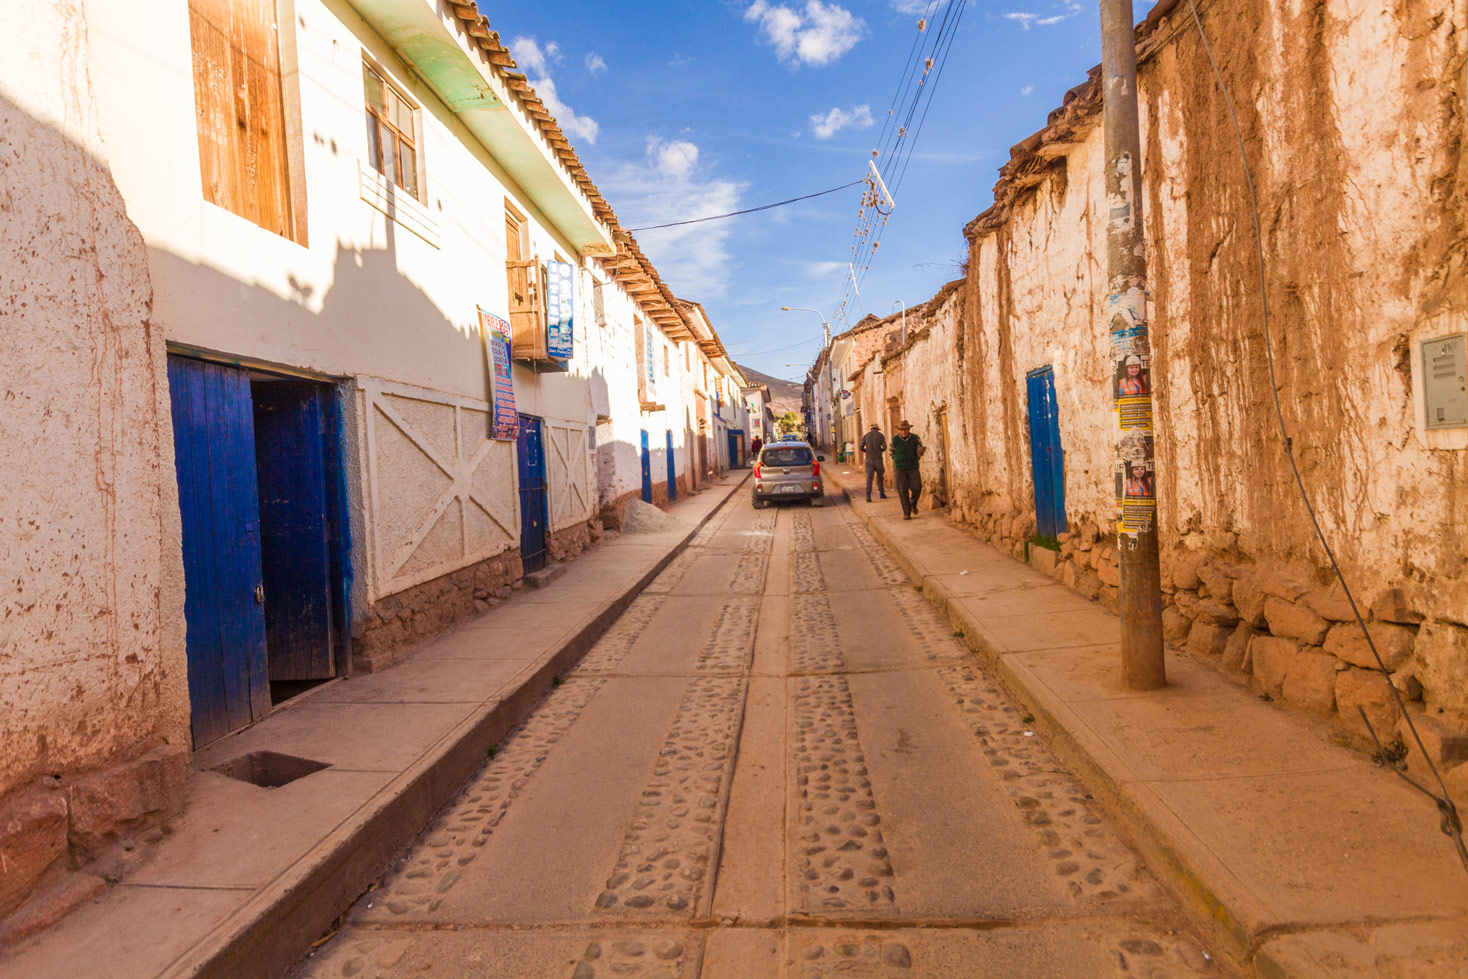 Blue doors and adobe buildings in a beautiful street seen in Moray Peru on a daytrip to the Sacred Valley Peru